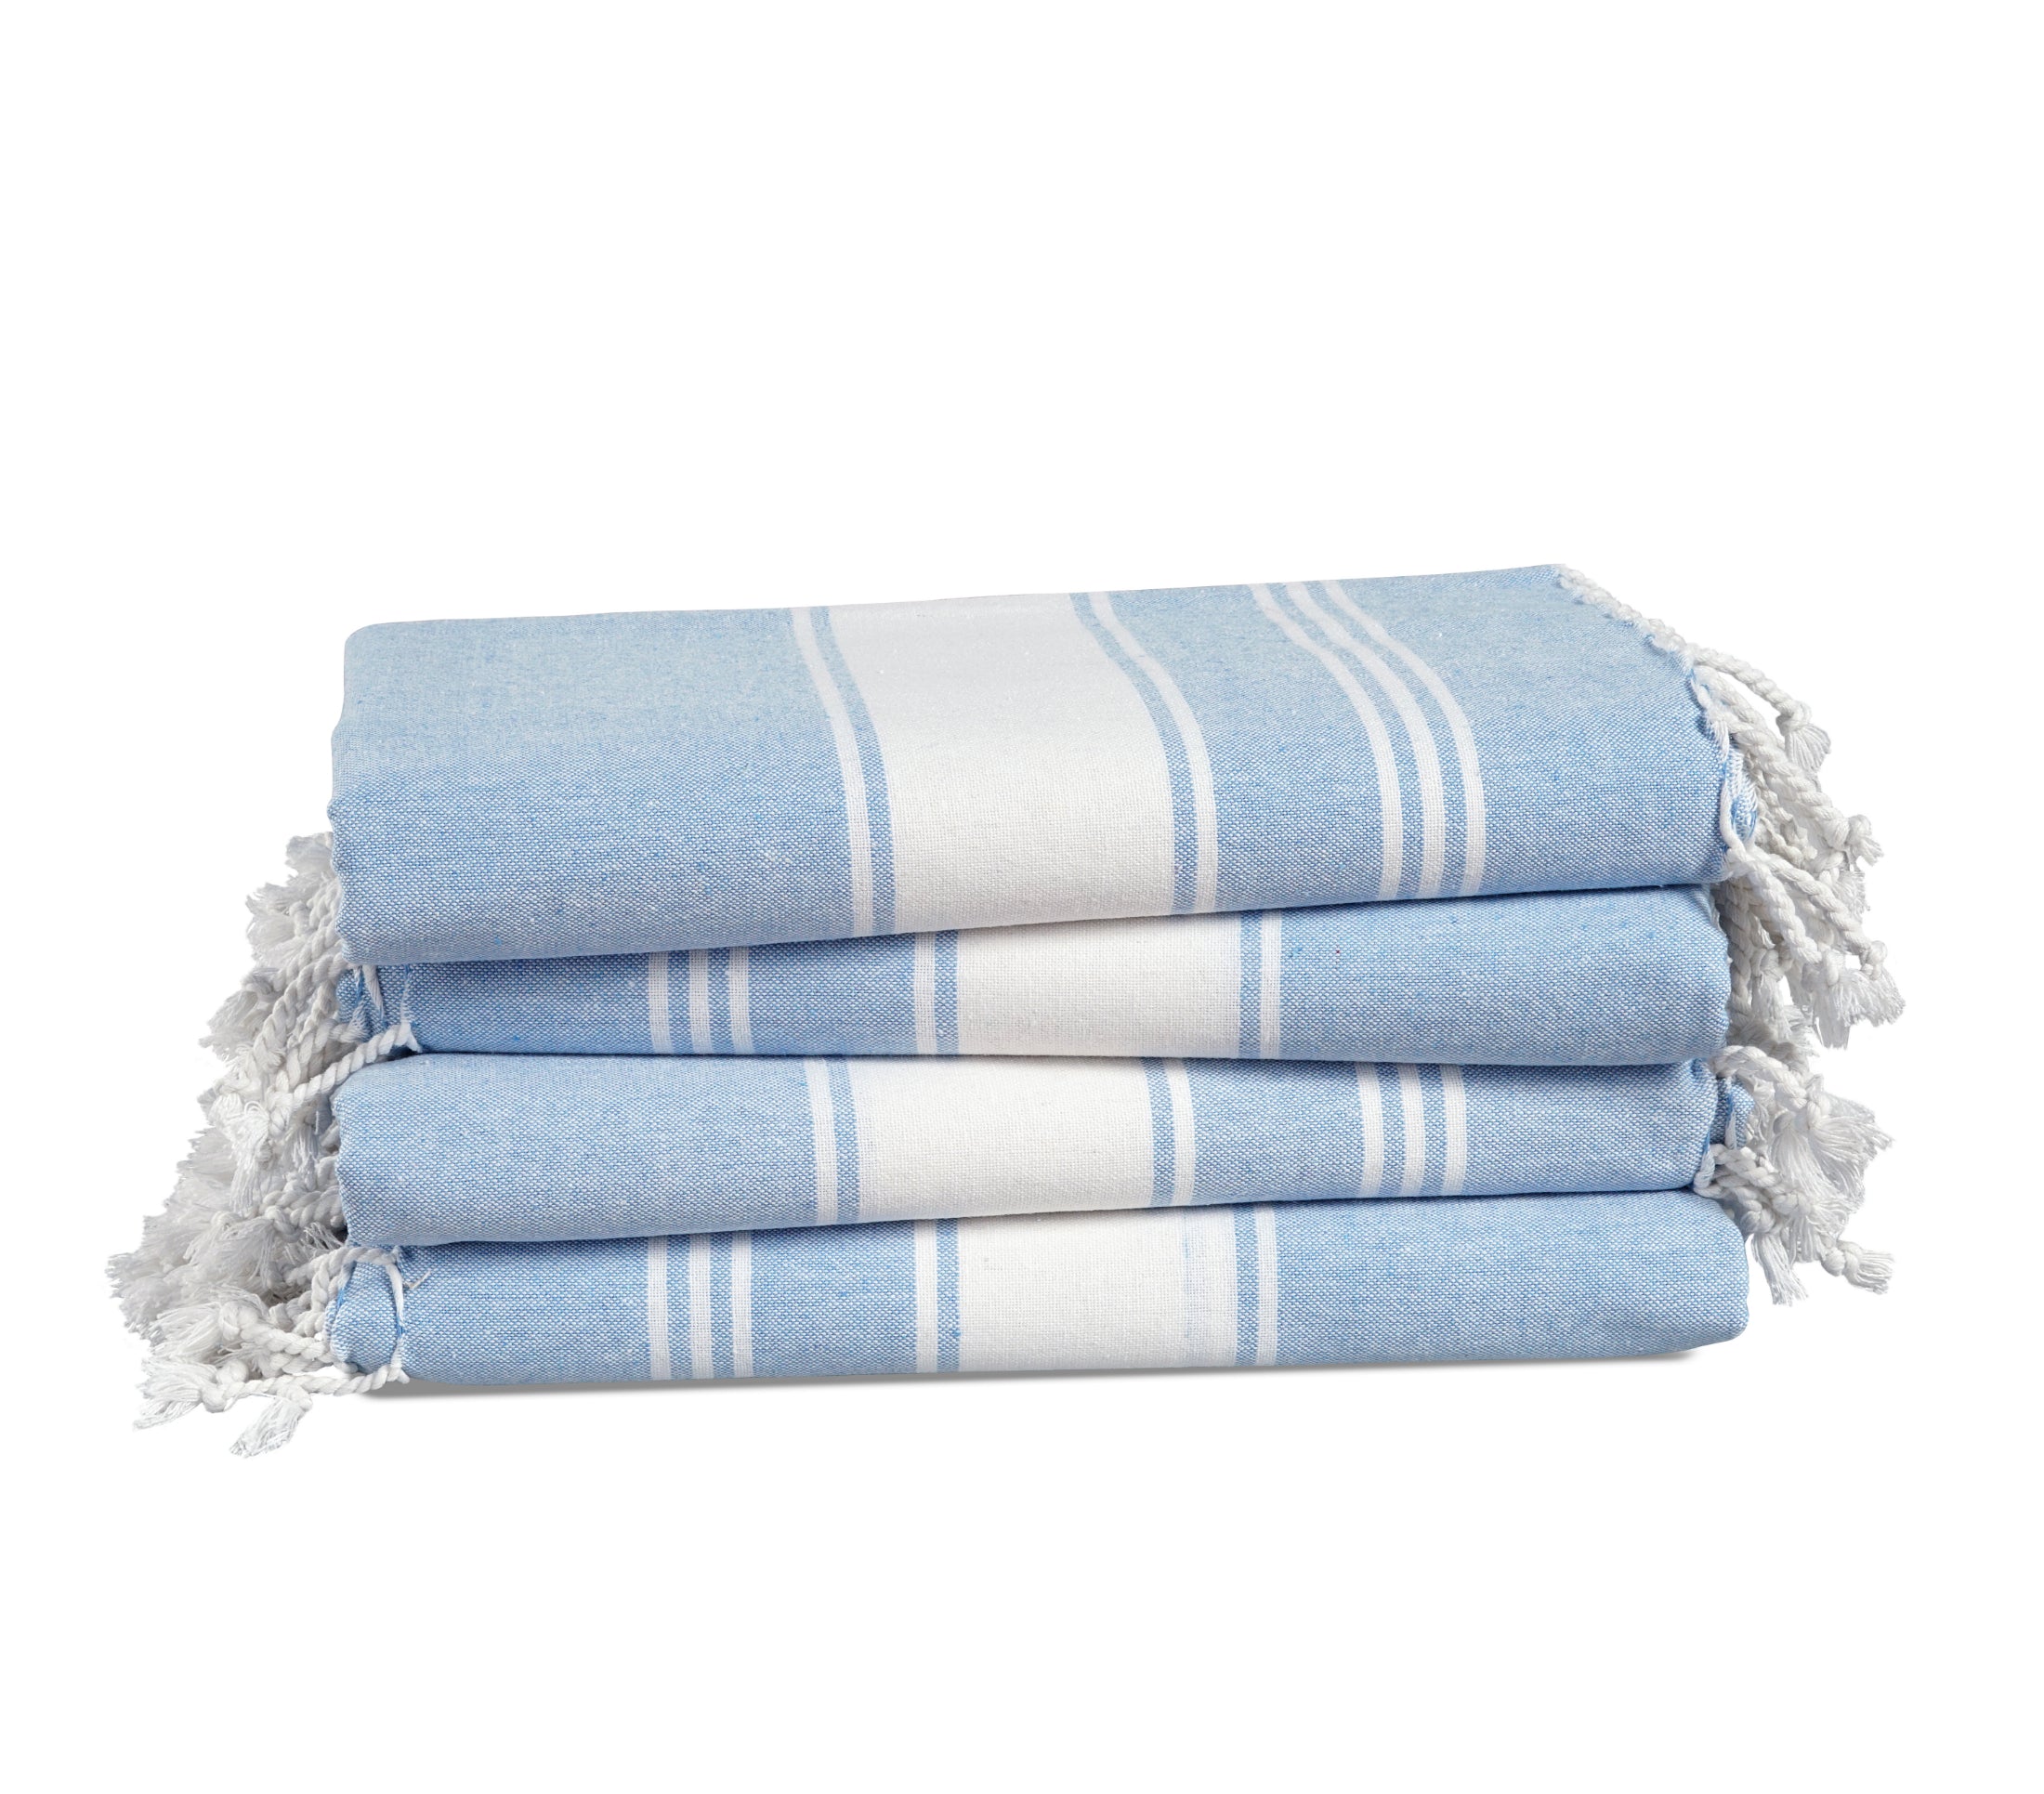 Set of 4 100% Cotton Chambray Turkish Beach Towels - Sky Blue